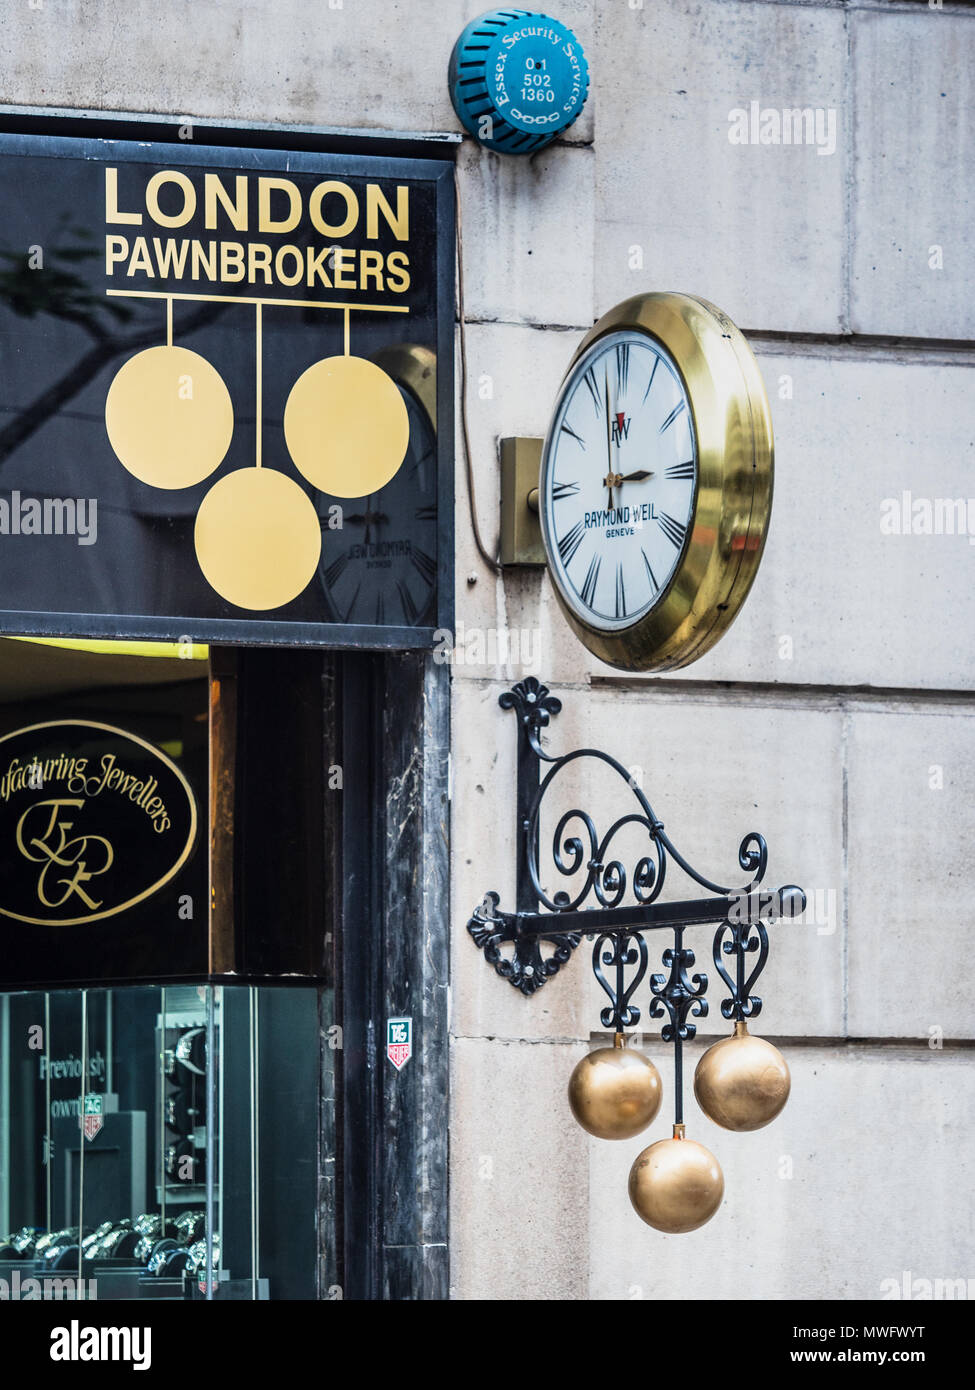 Pawnbrokers London - Pawn Shop in Hatton Garden, London's Jewellery and Diamond district Stock Photo